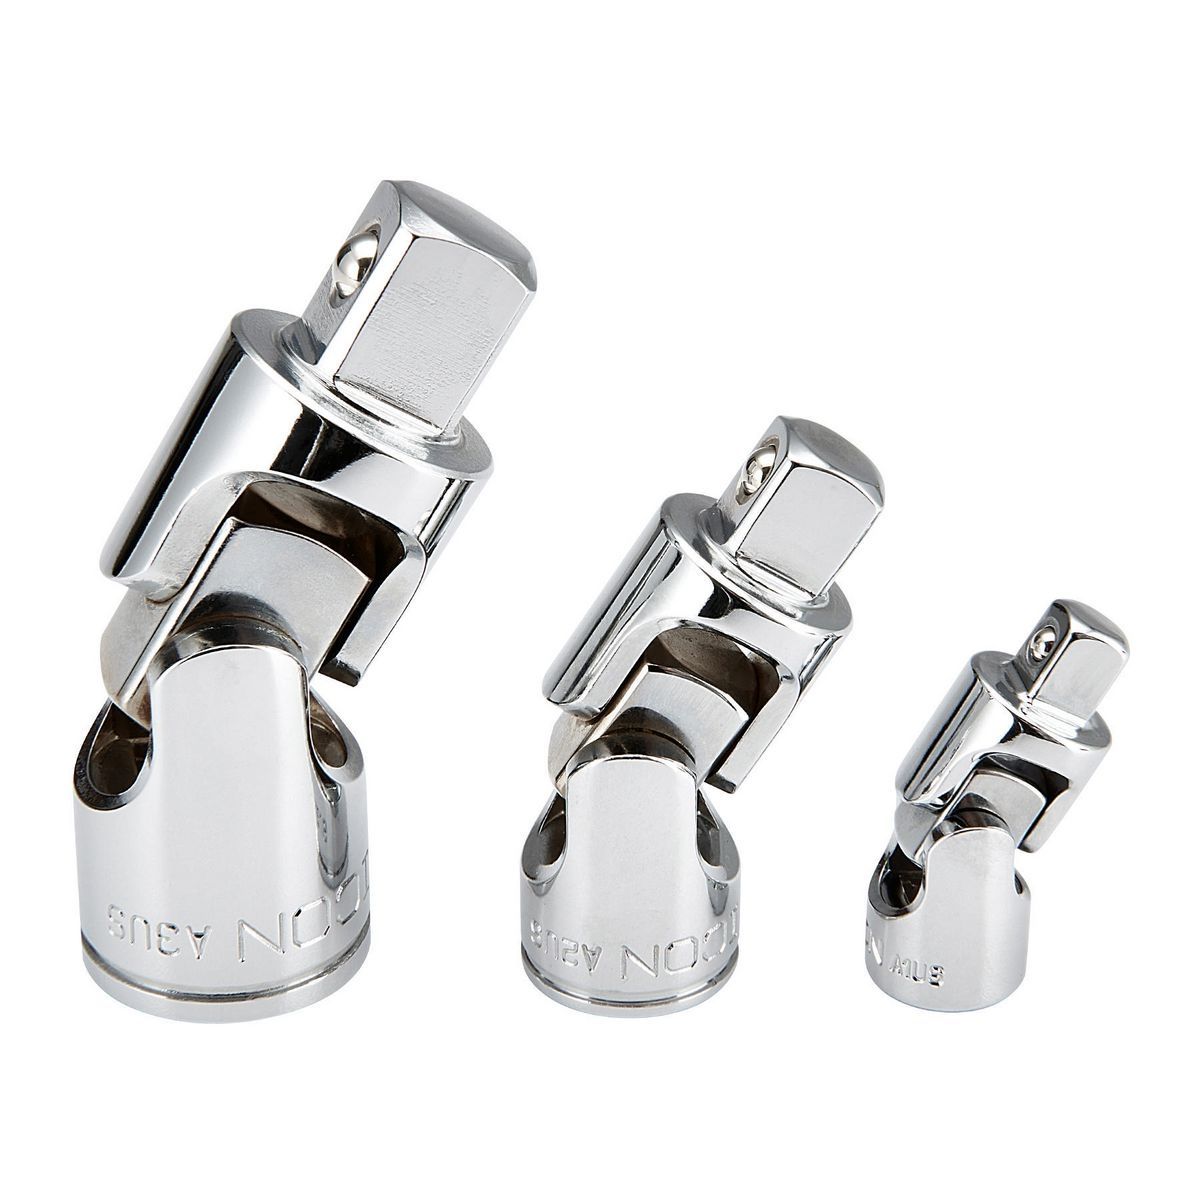 ICON Professional Universal Joint Socket Adapter Set, 3 Pc